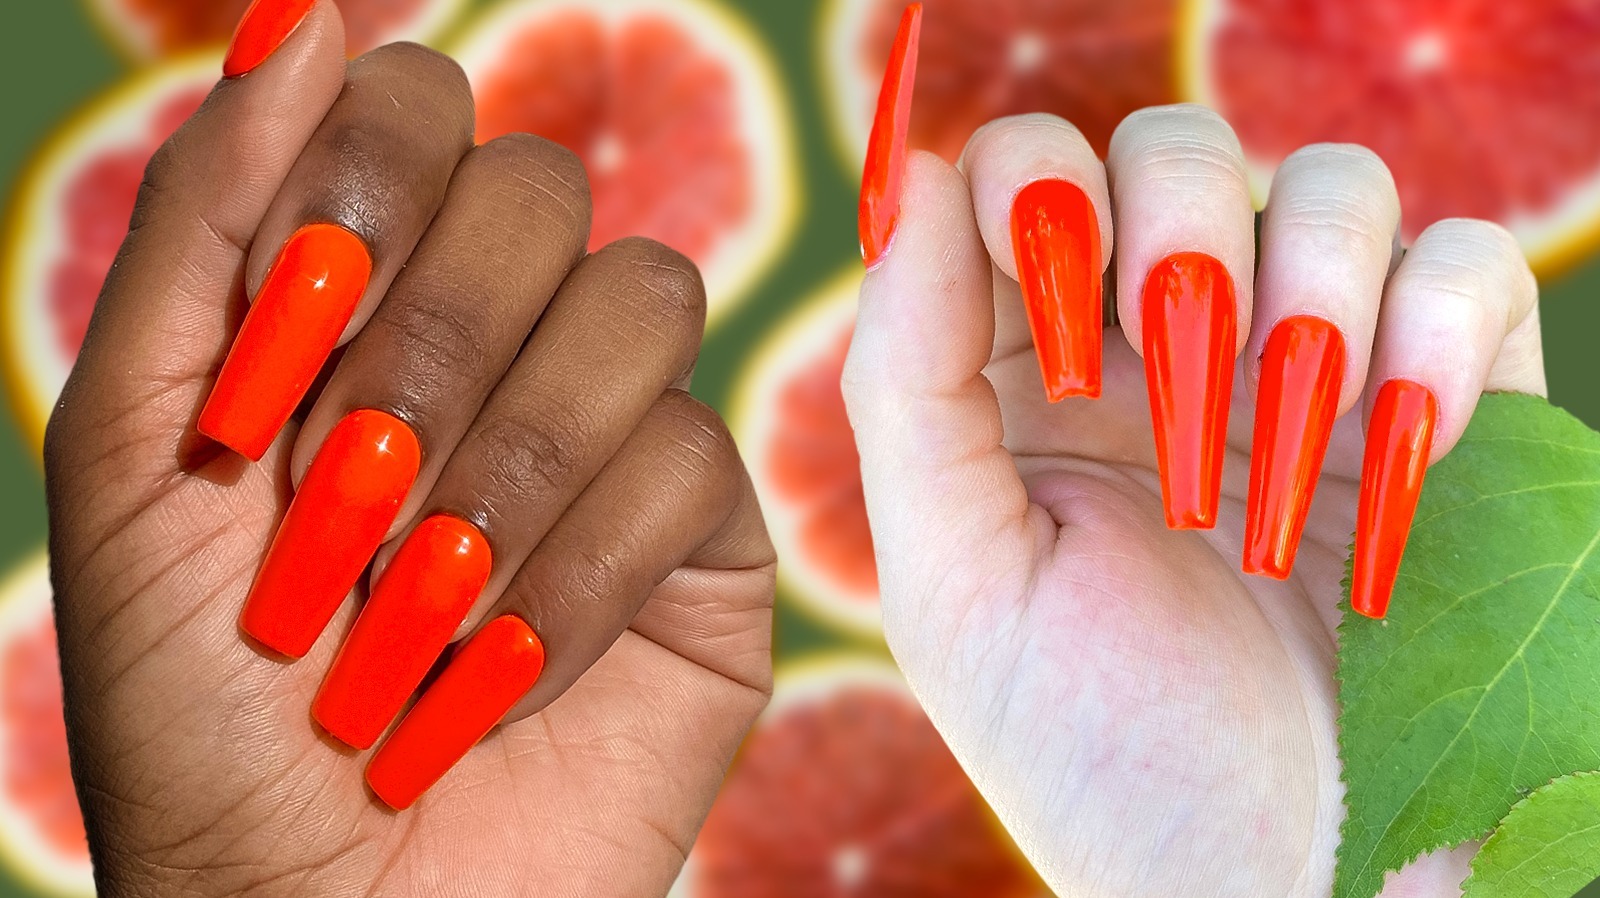 Red Nails Are The Ultimate Power Look. Here Are Our Favorite Rouge Manis